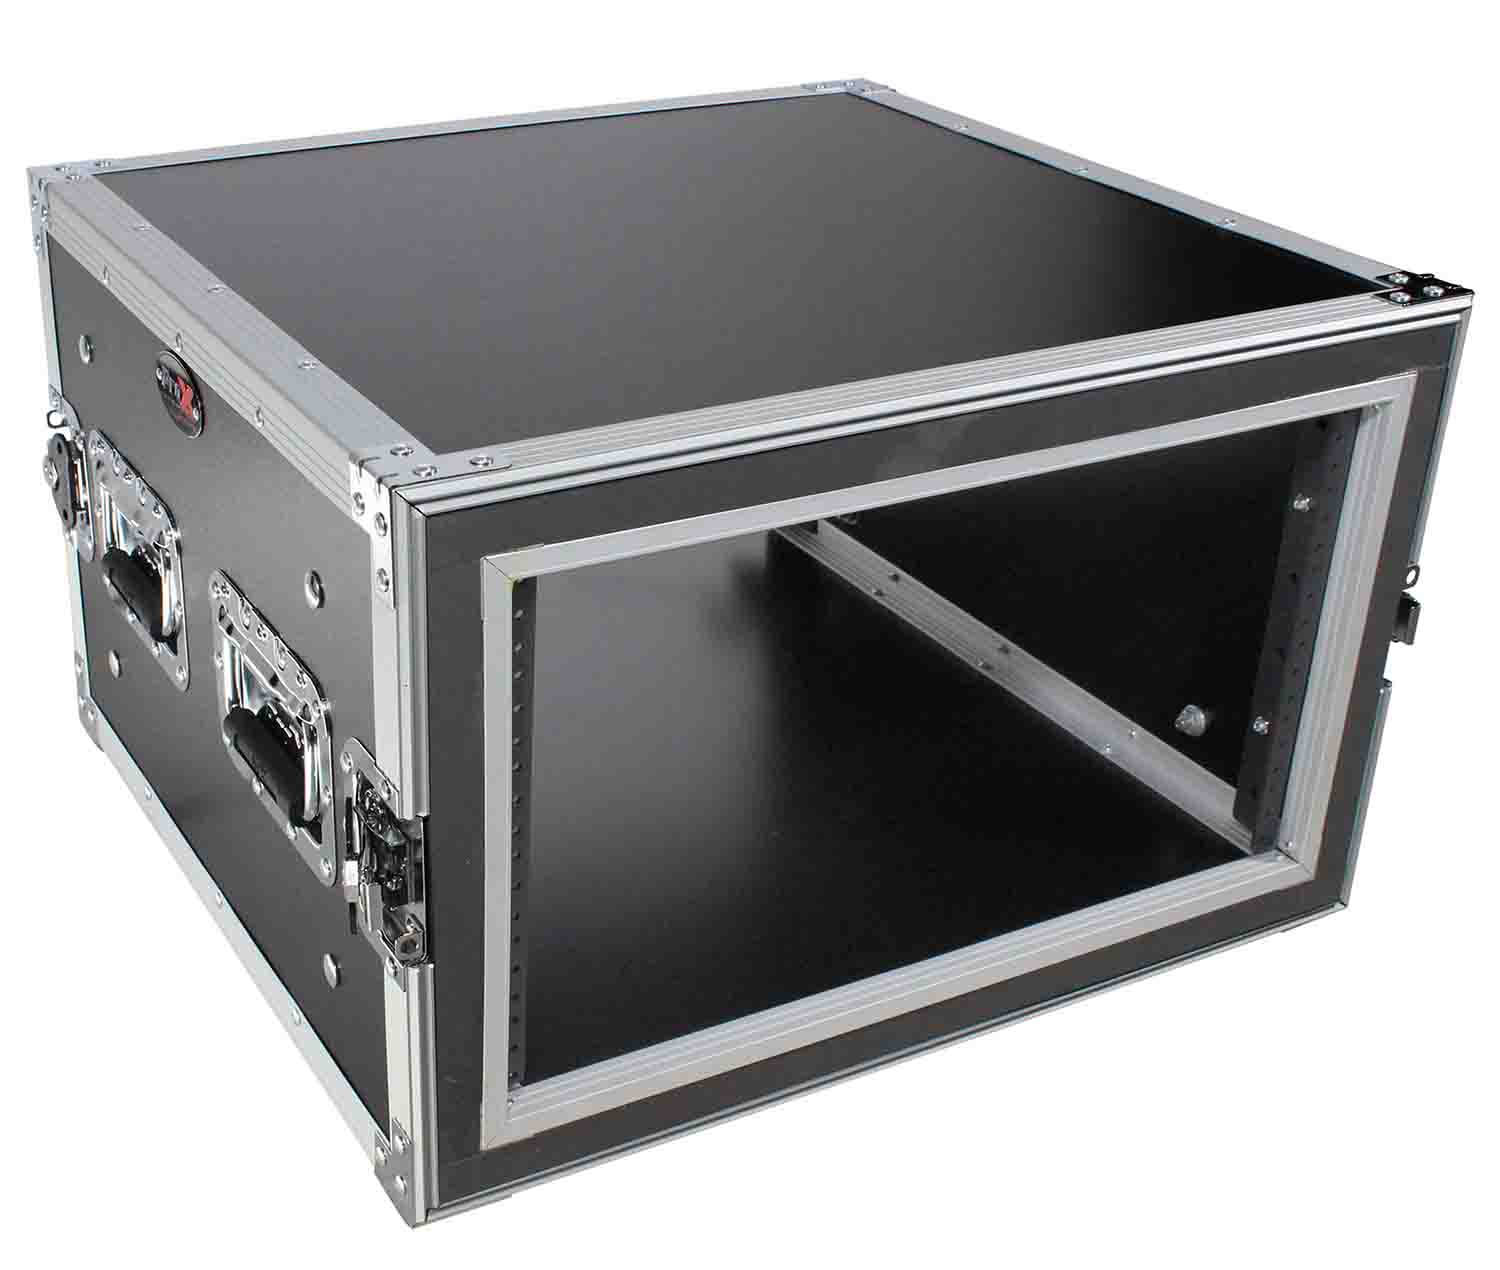 ProX T-6RSP 6 Space 6U Shockproof Amp Rack ATA Flight Case with Recessed Handles - 20 Inch Depth - Hollywood DJ